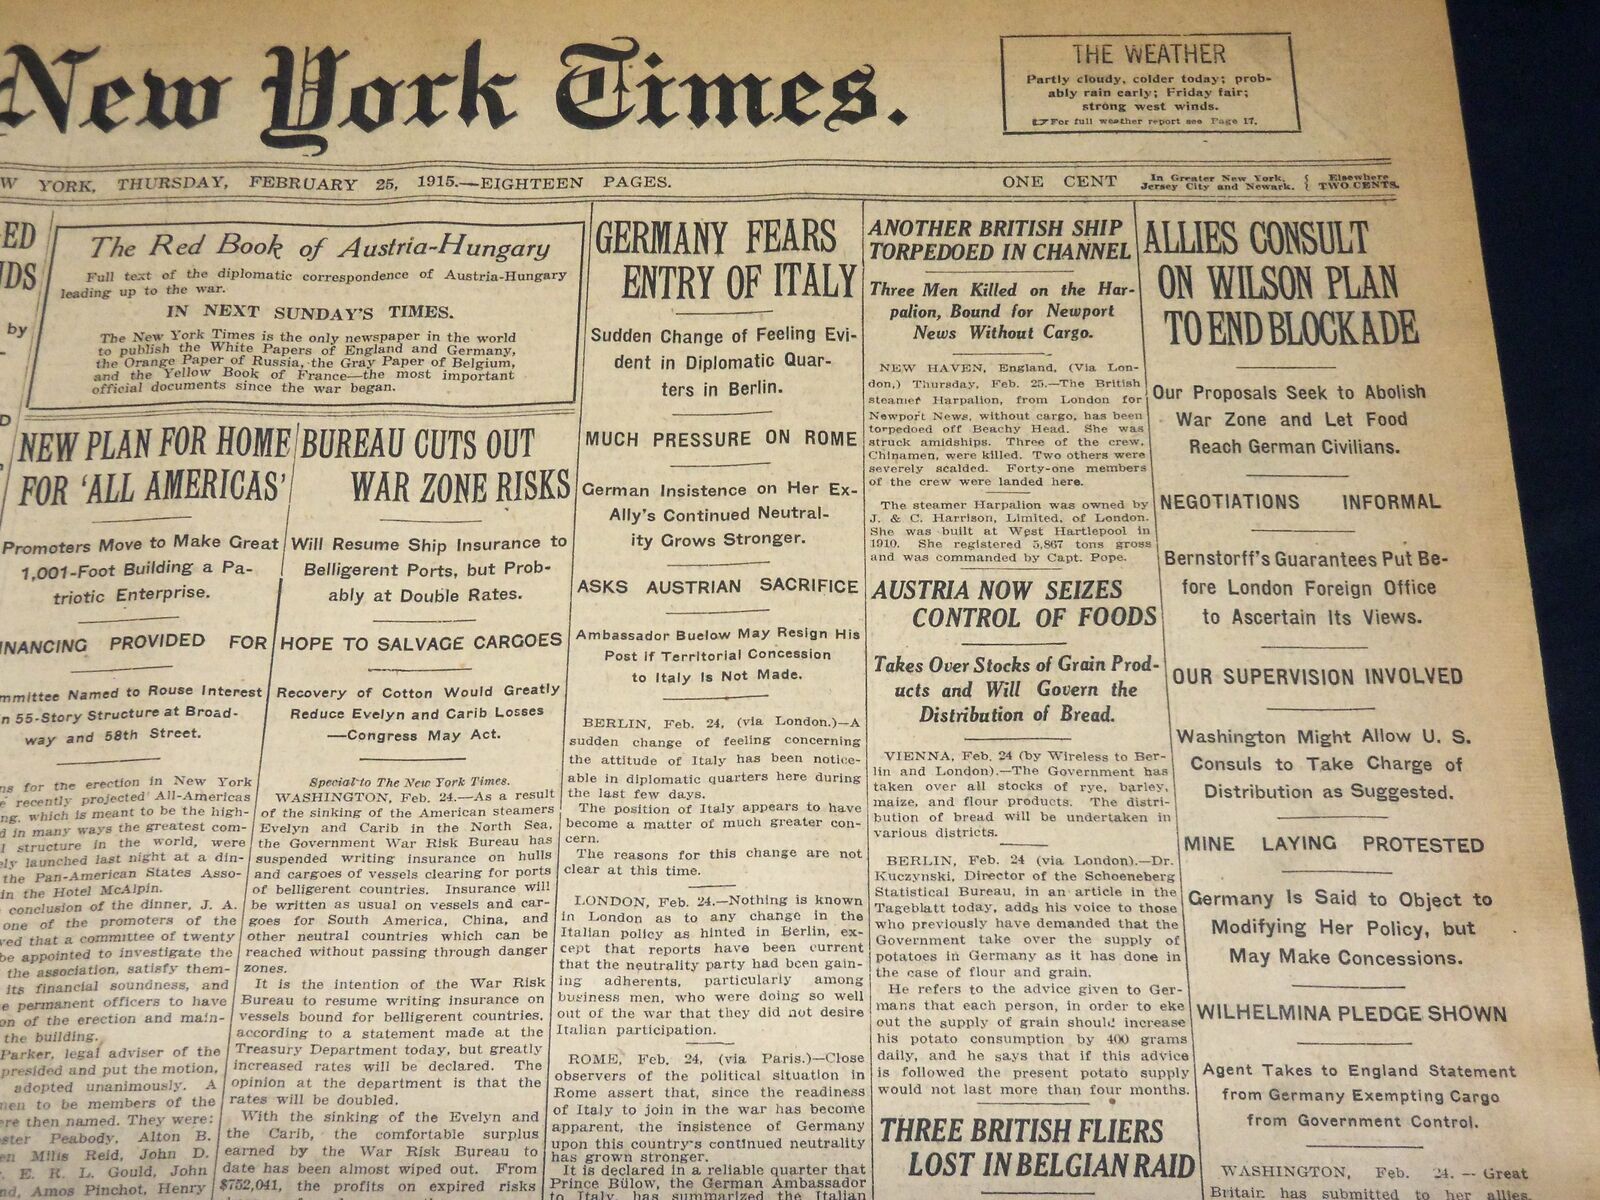 1915 FEBRUARY 25 NEW YORK TIMES - ALLIES CONSULT WILSON ON BLOCKADE END- NT 7774